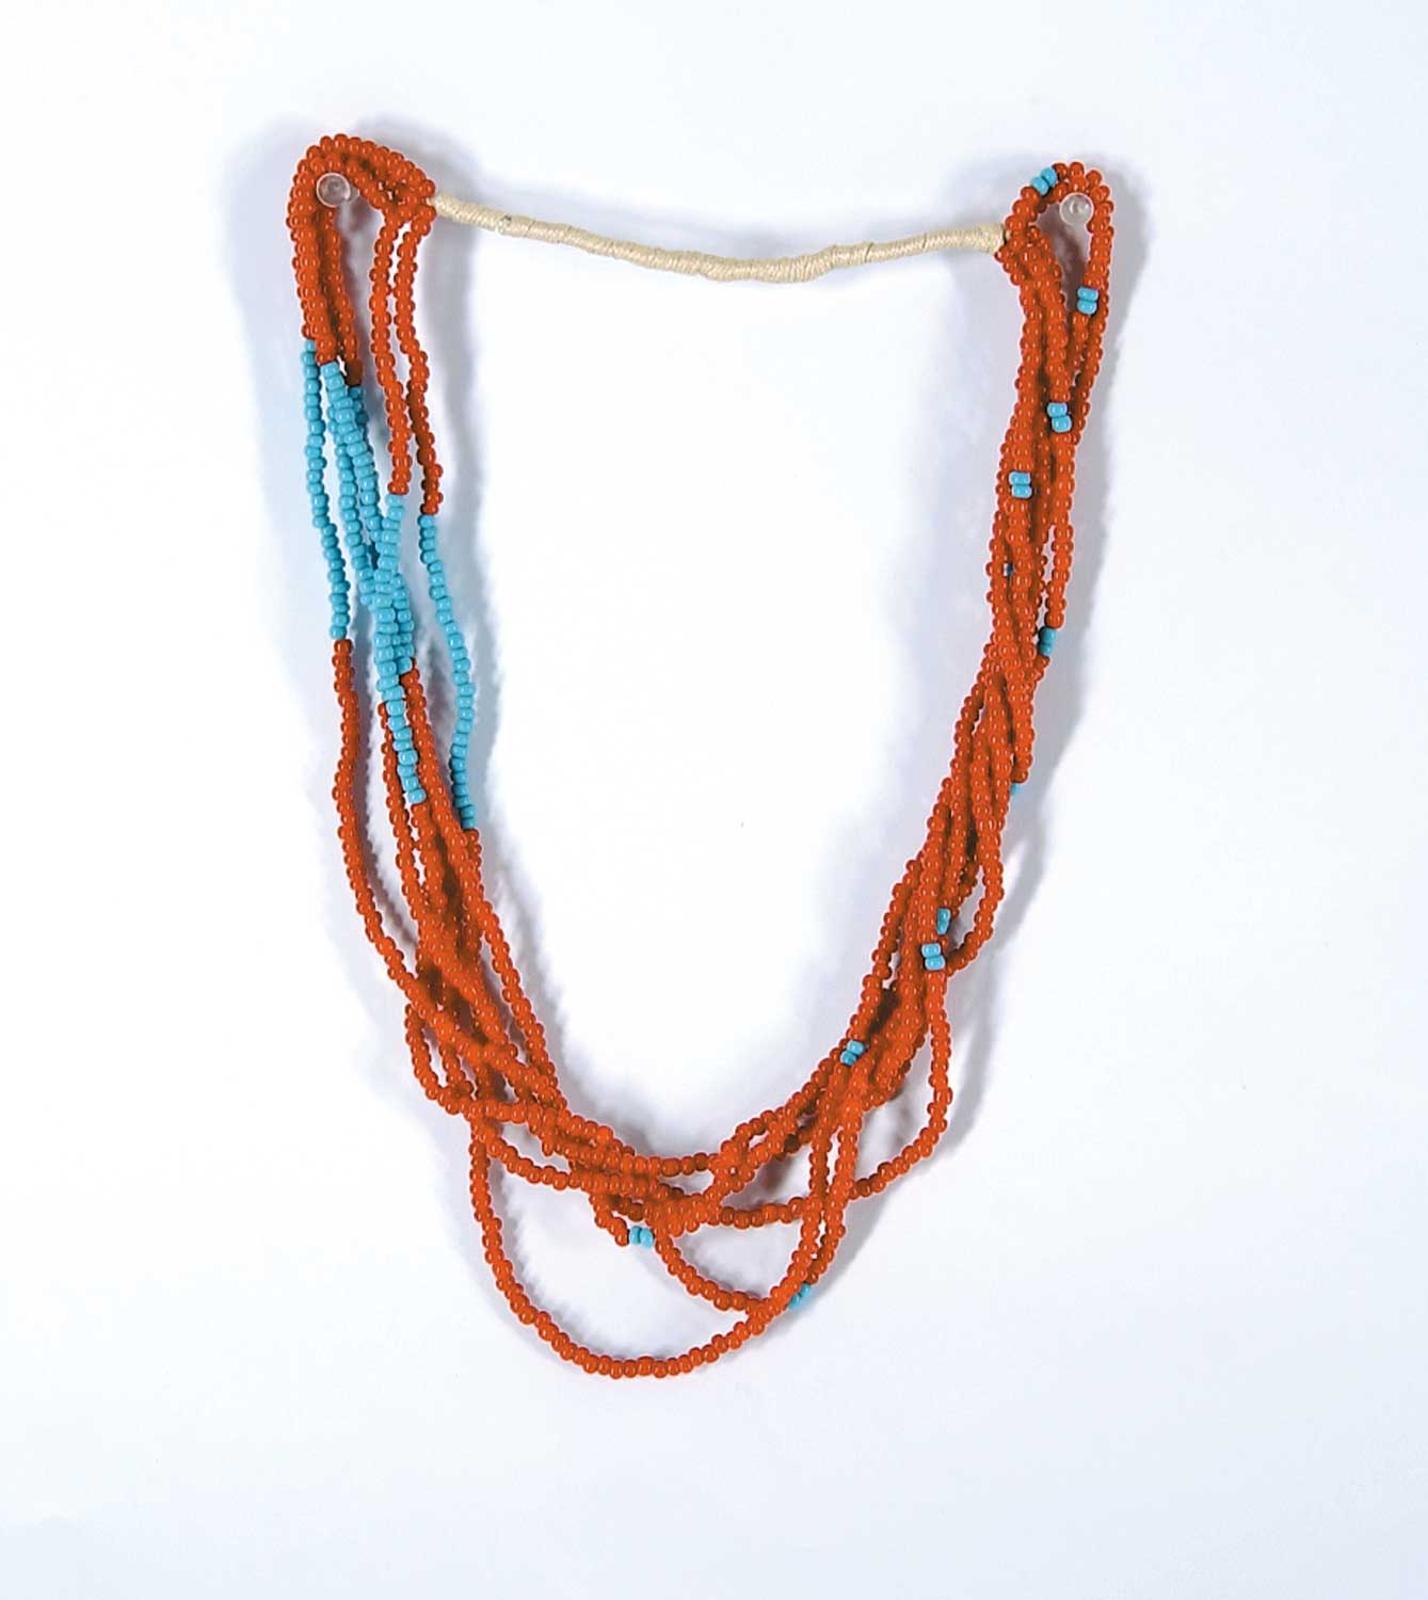 Robert Charles Aller (1922-2008) - Untitled - Red and Blue Beaded Necklace